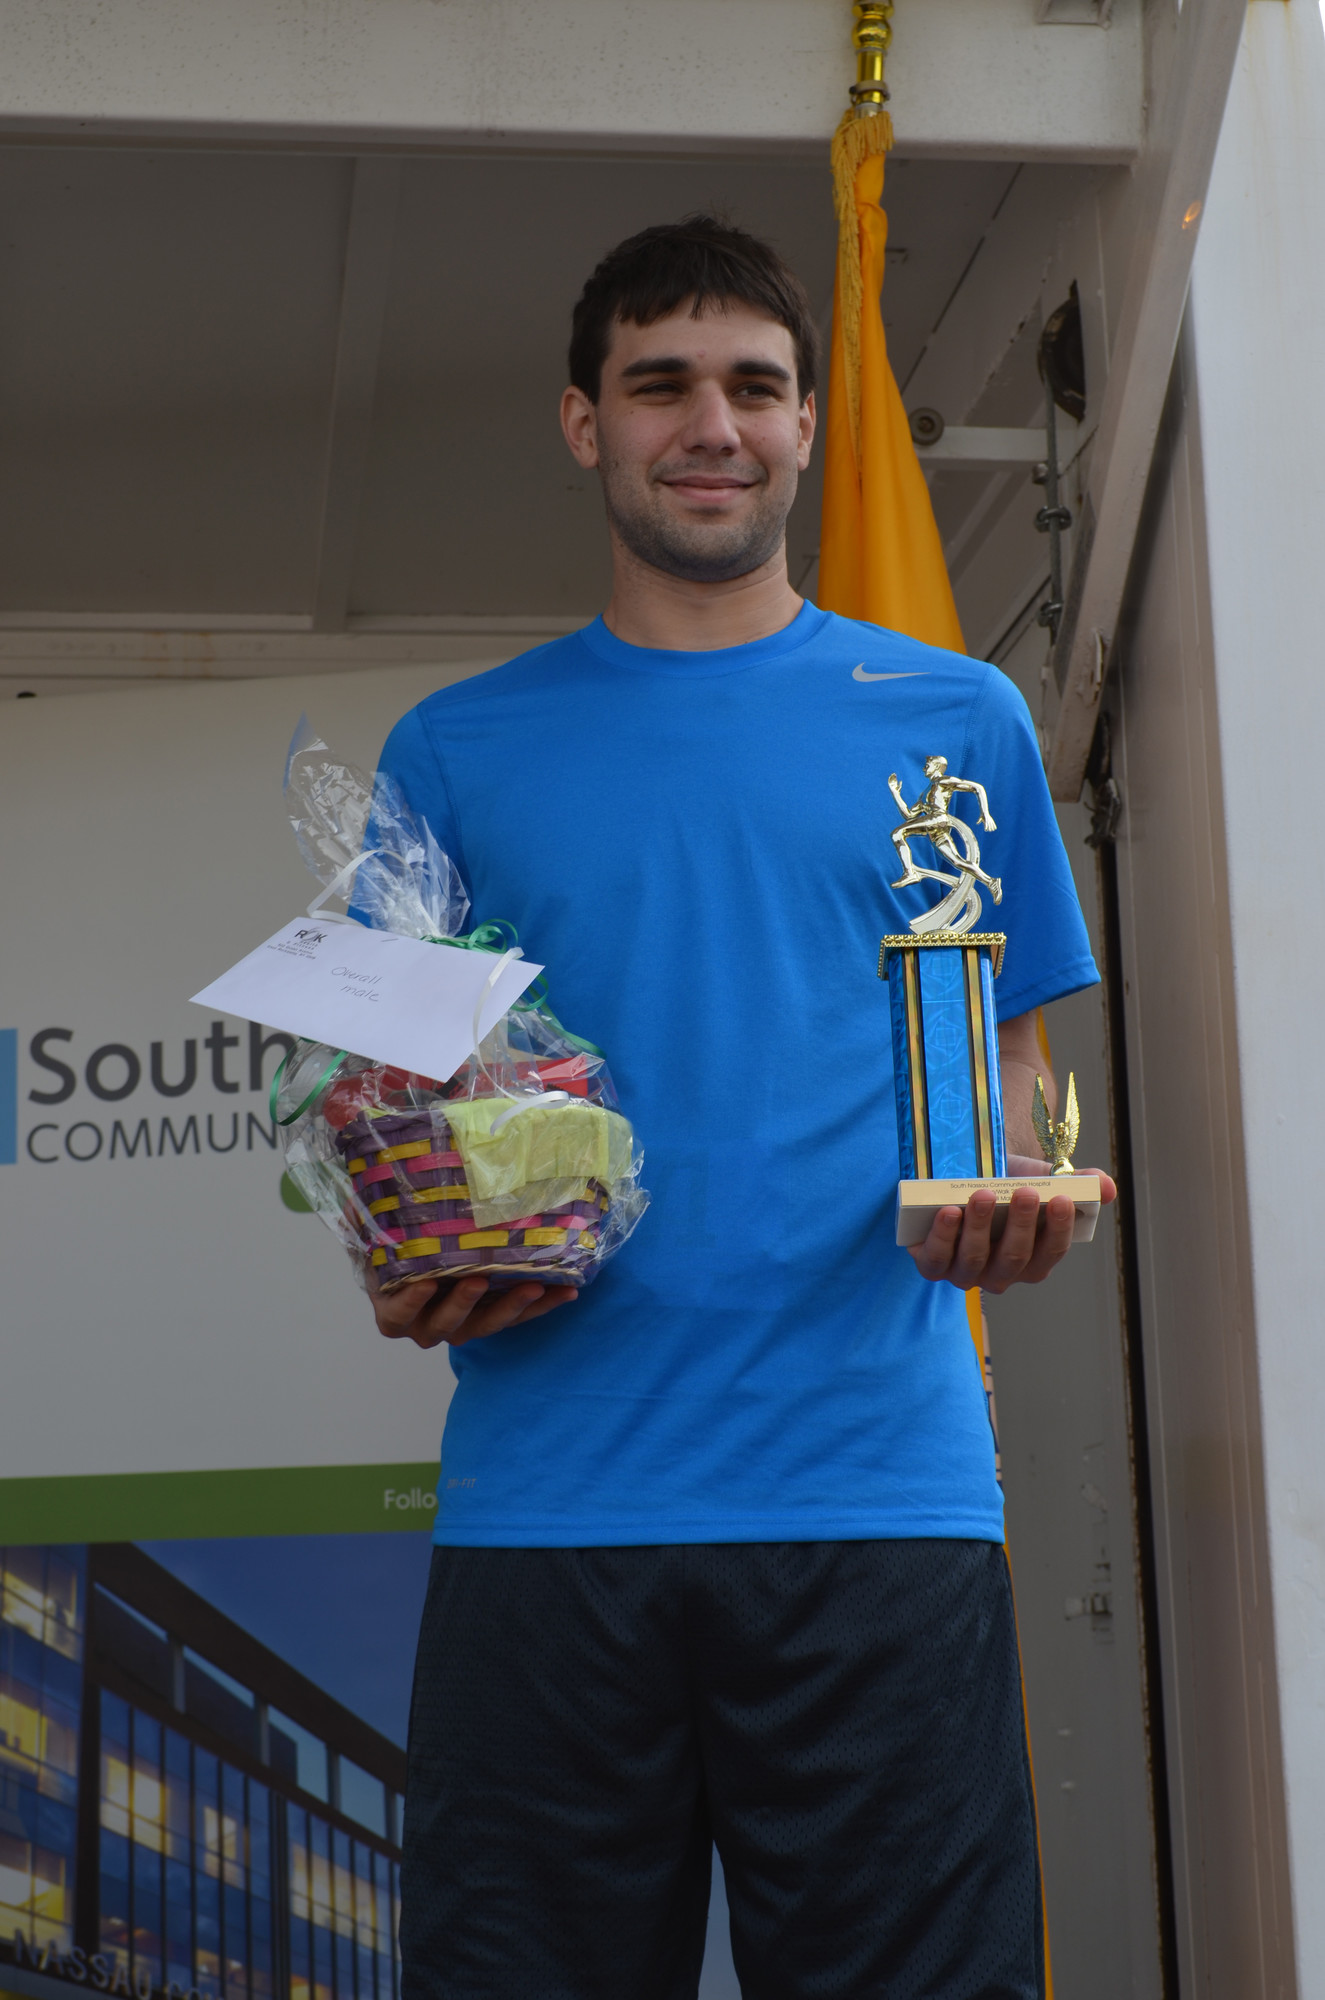 David Tohman, 26, of Oceanside, wins 1st place from the race!